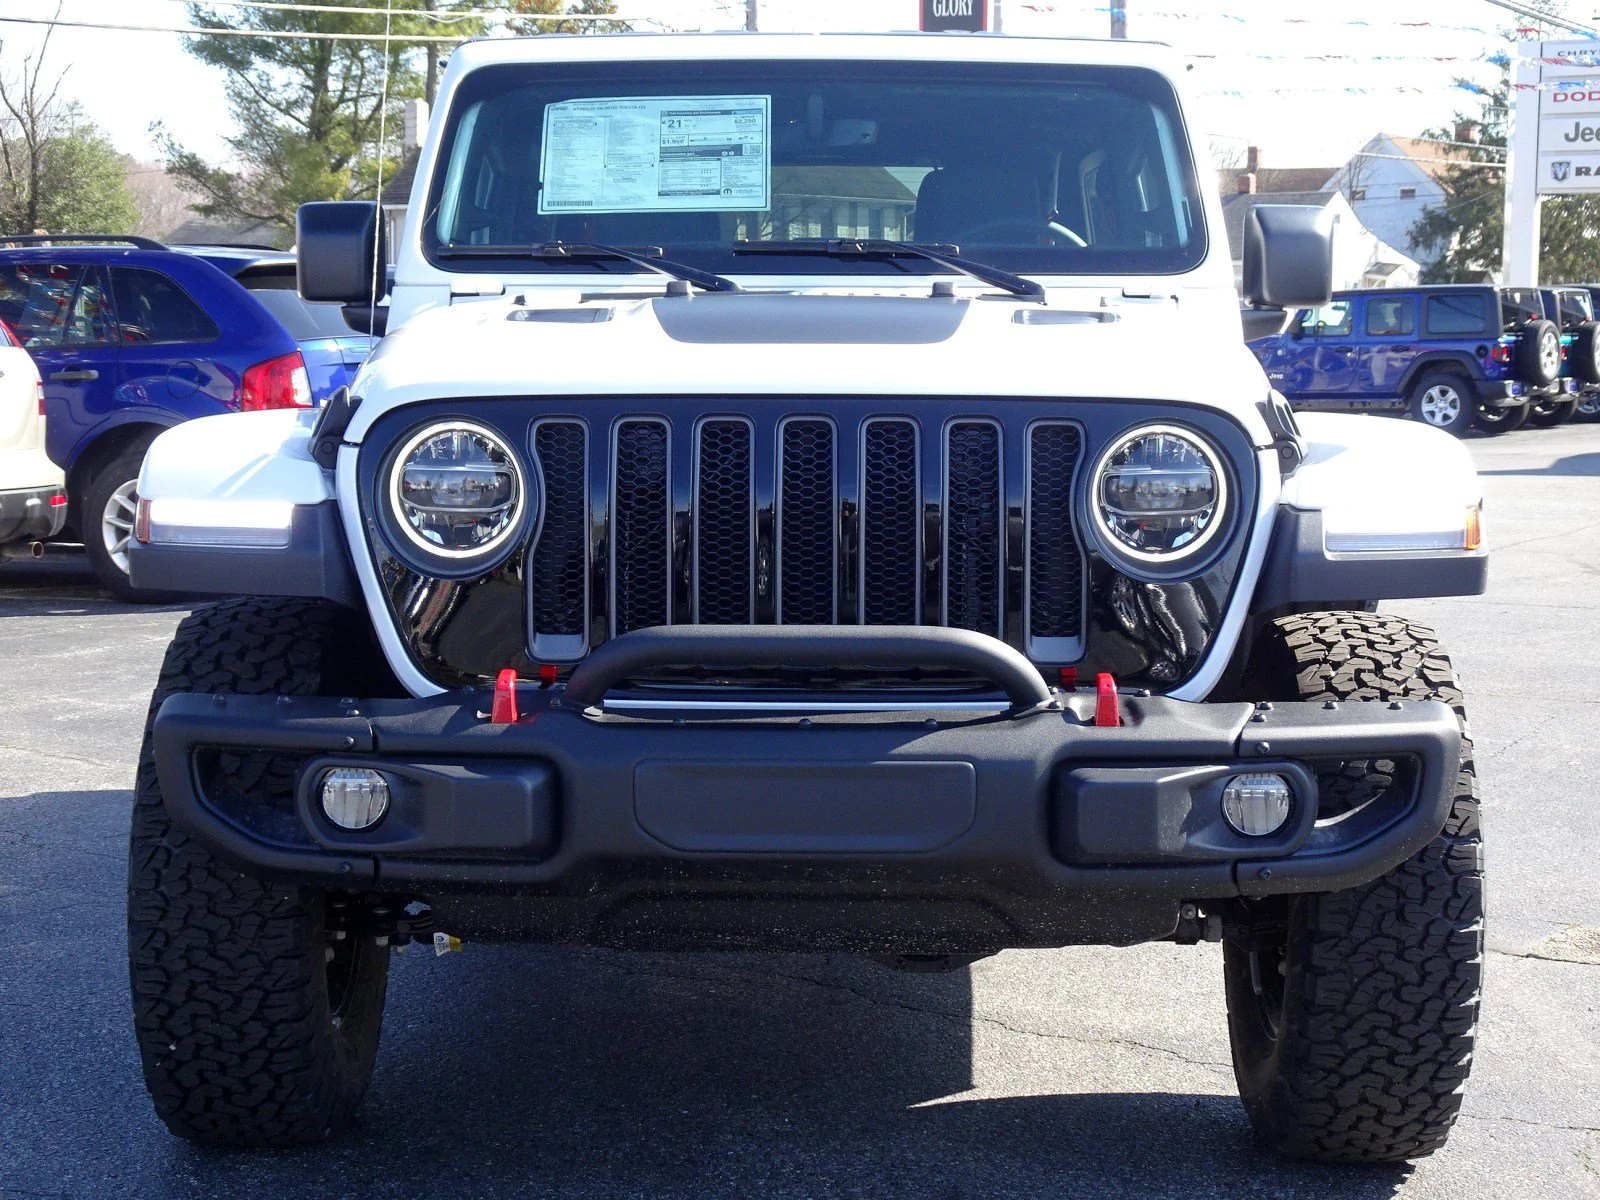 Jeep Wrangler Rubicon Recon Models Are Appearing In Dealer Showrooms Moparinsiders